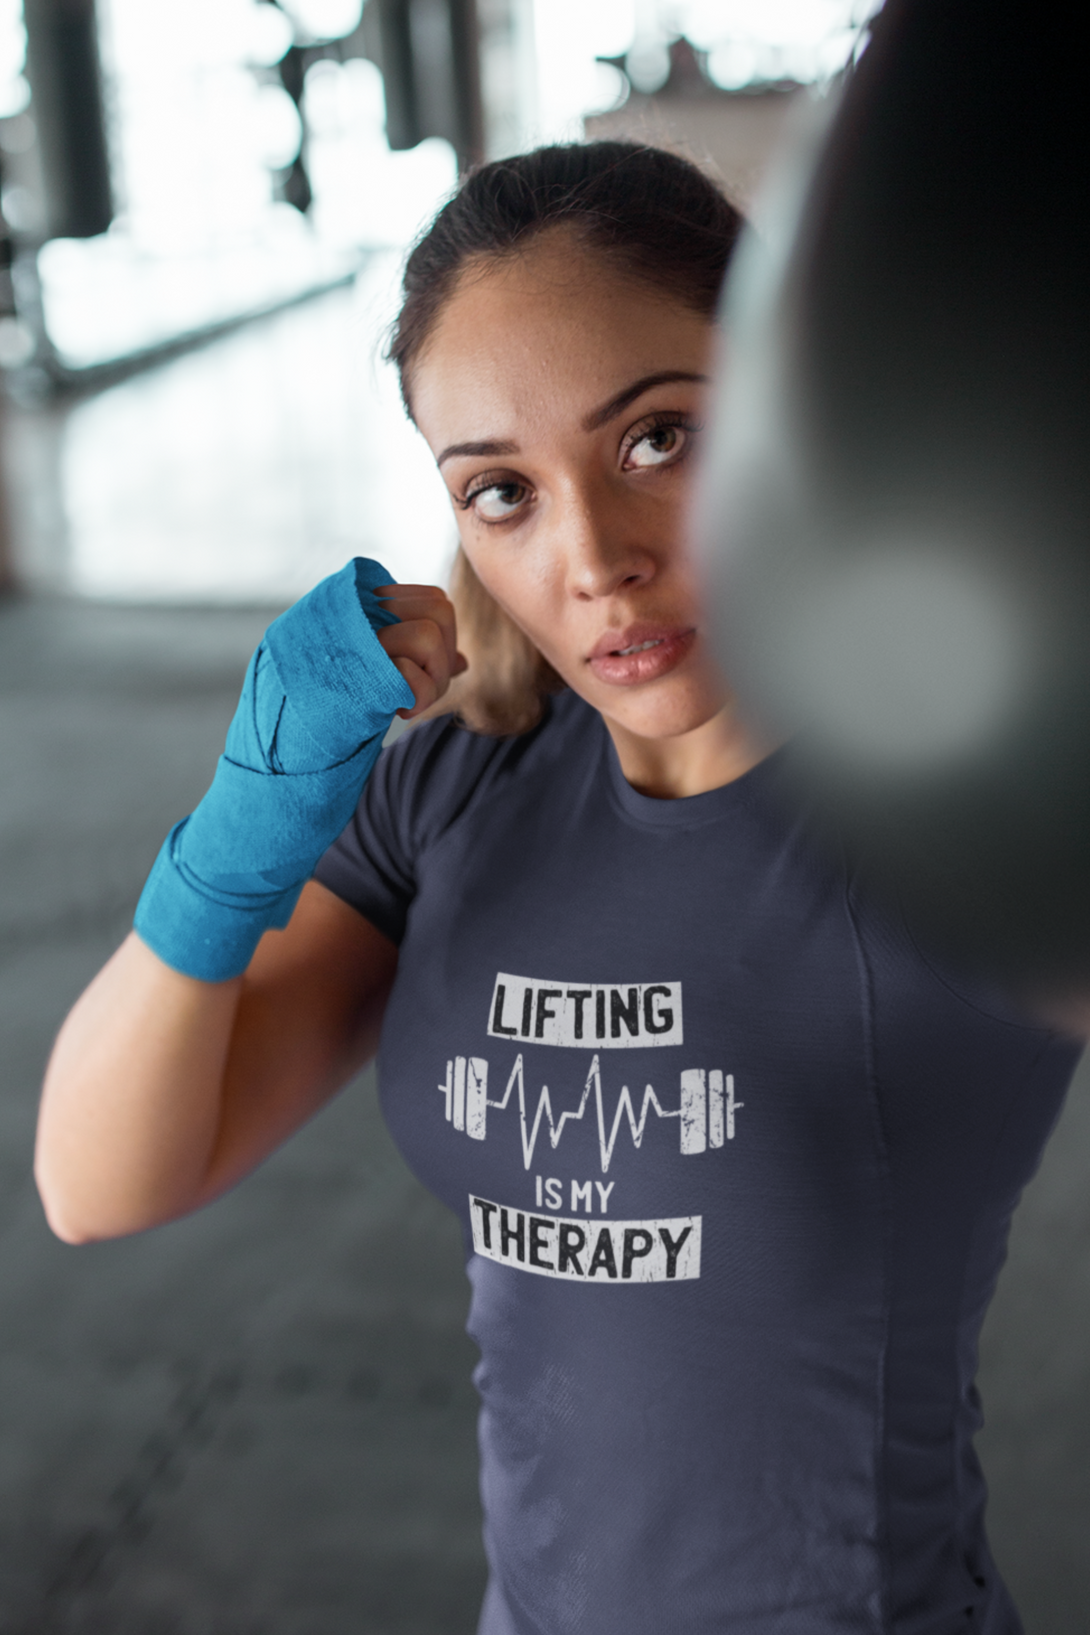 Lifting Is My Therapy Printed T-Shirt For Women - WowWaves - 9